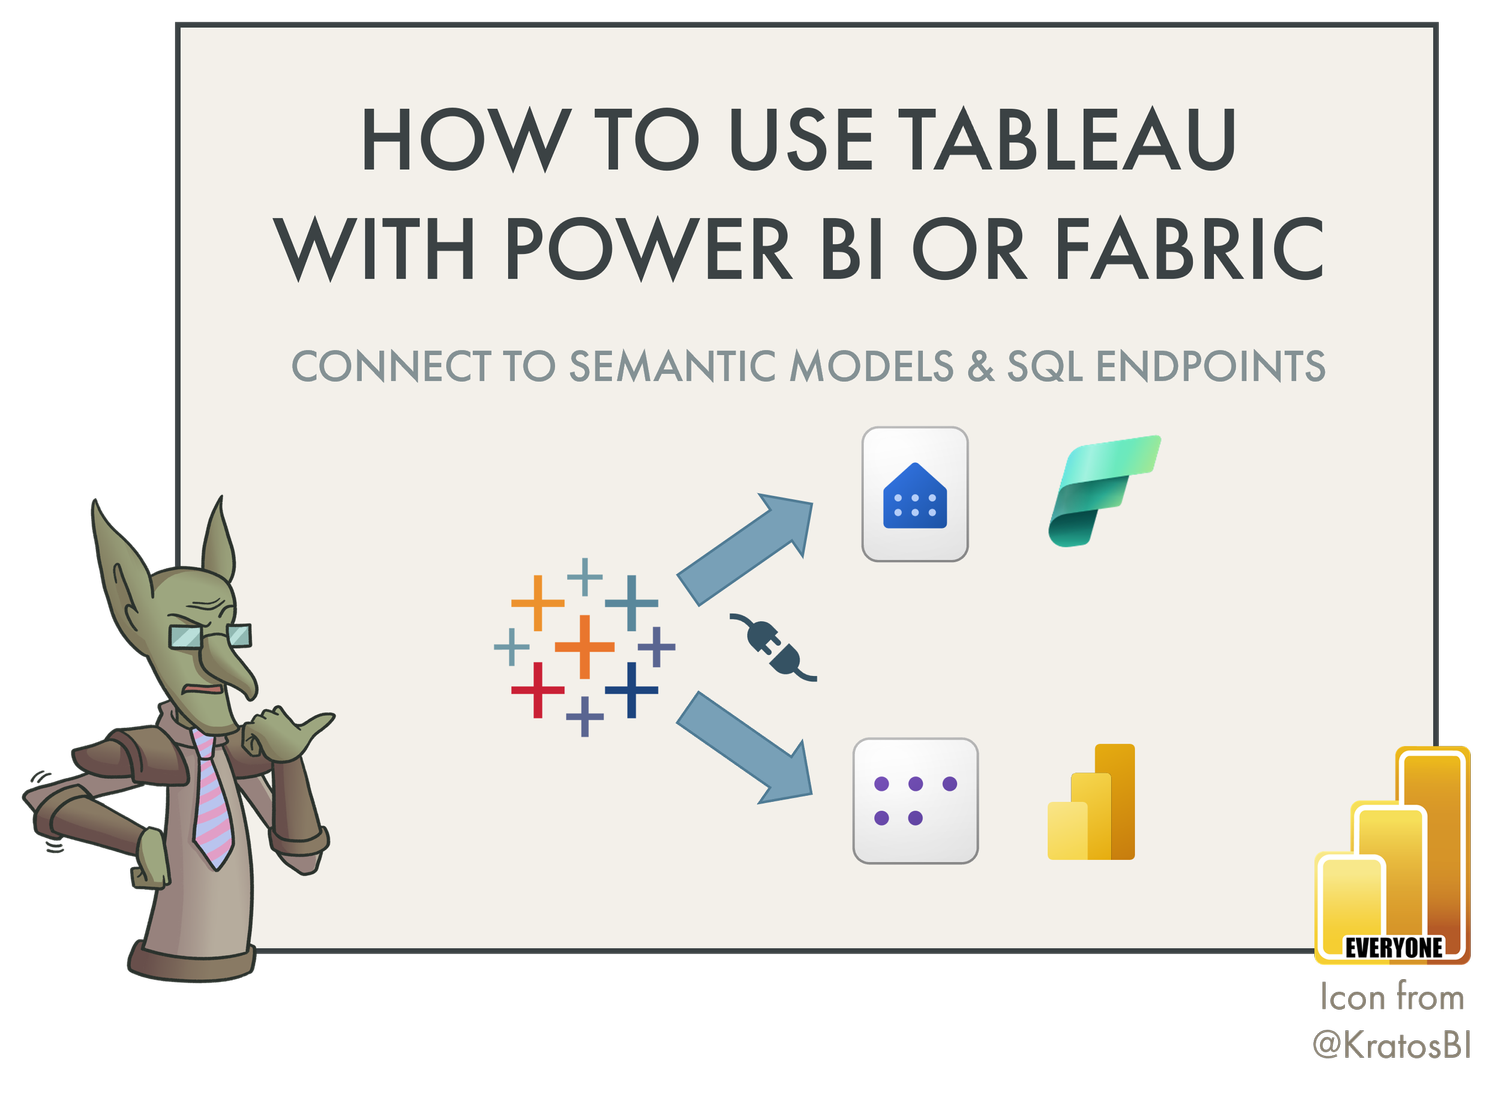 How to use Tableau with Power BI and Fabric 